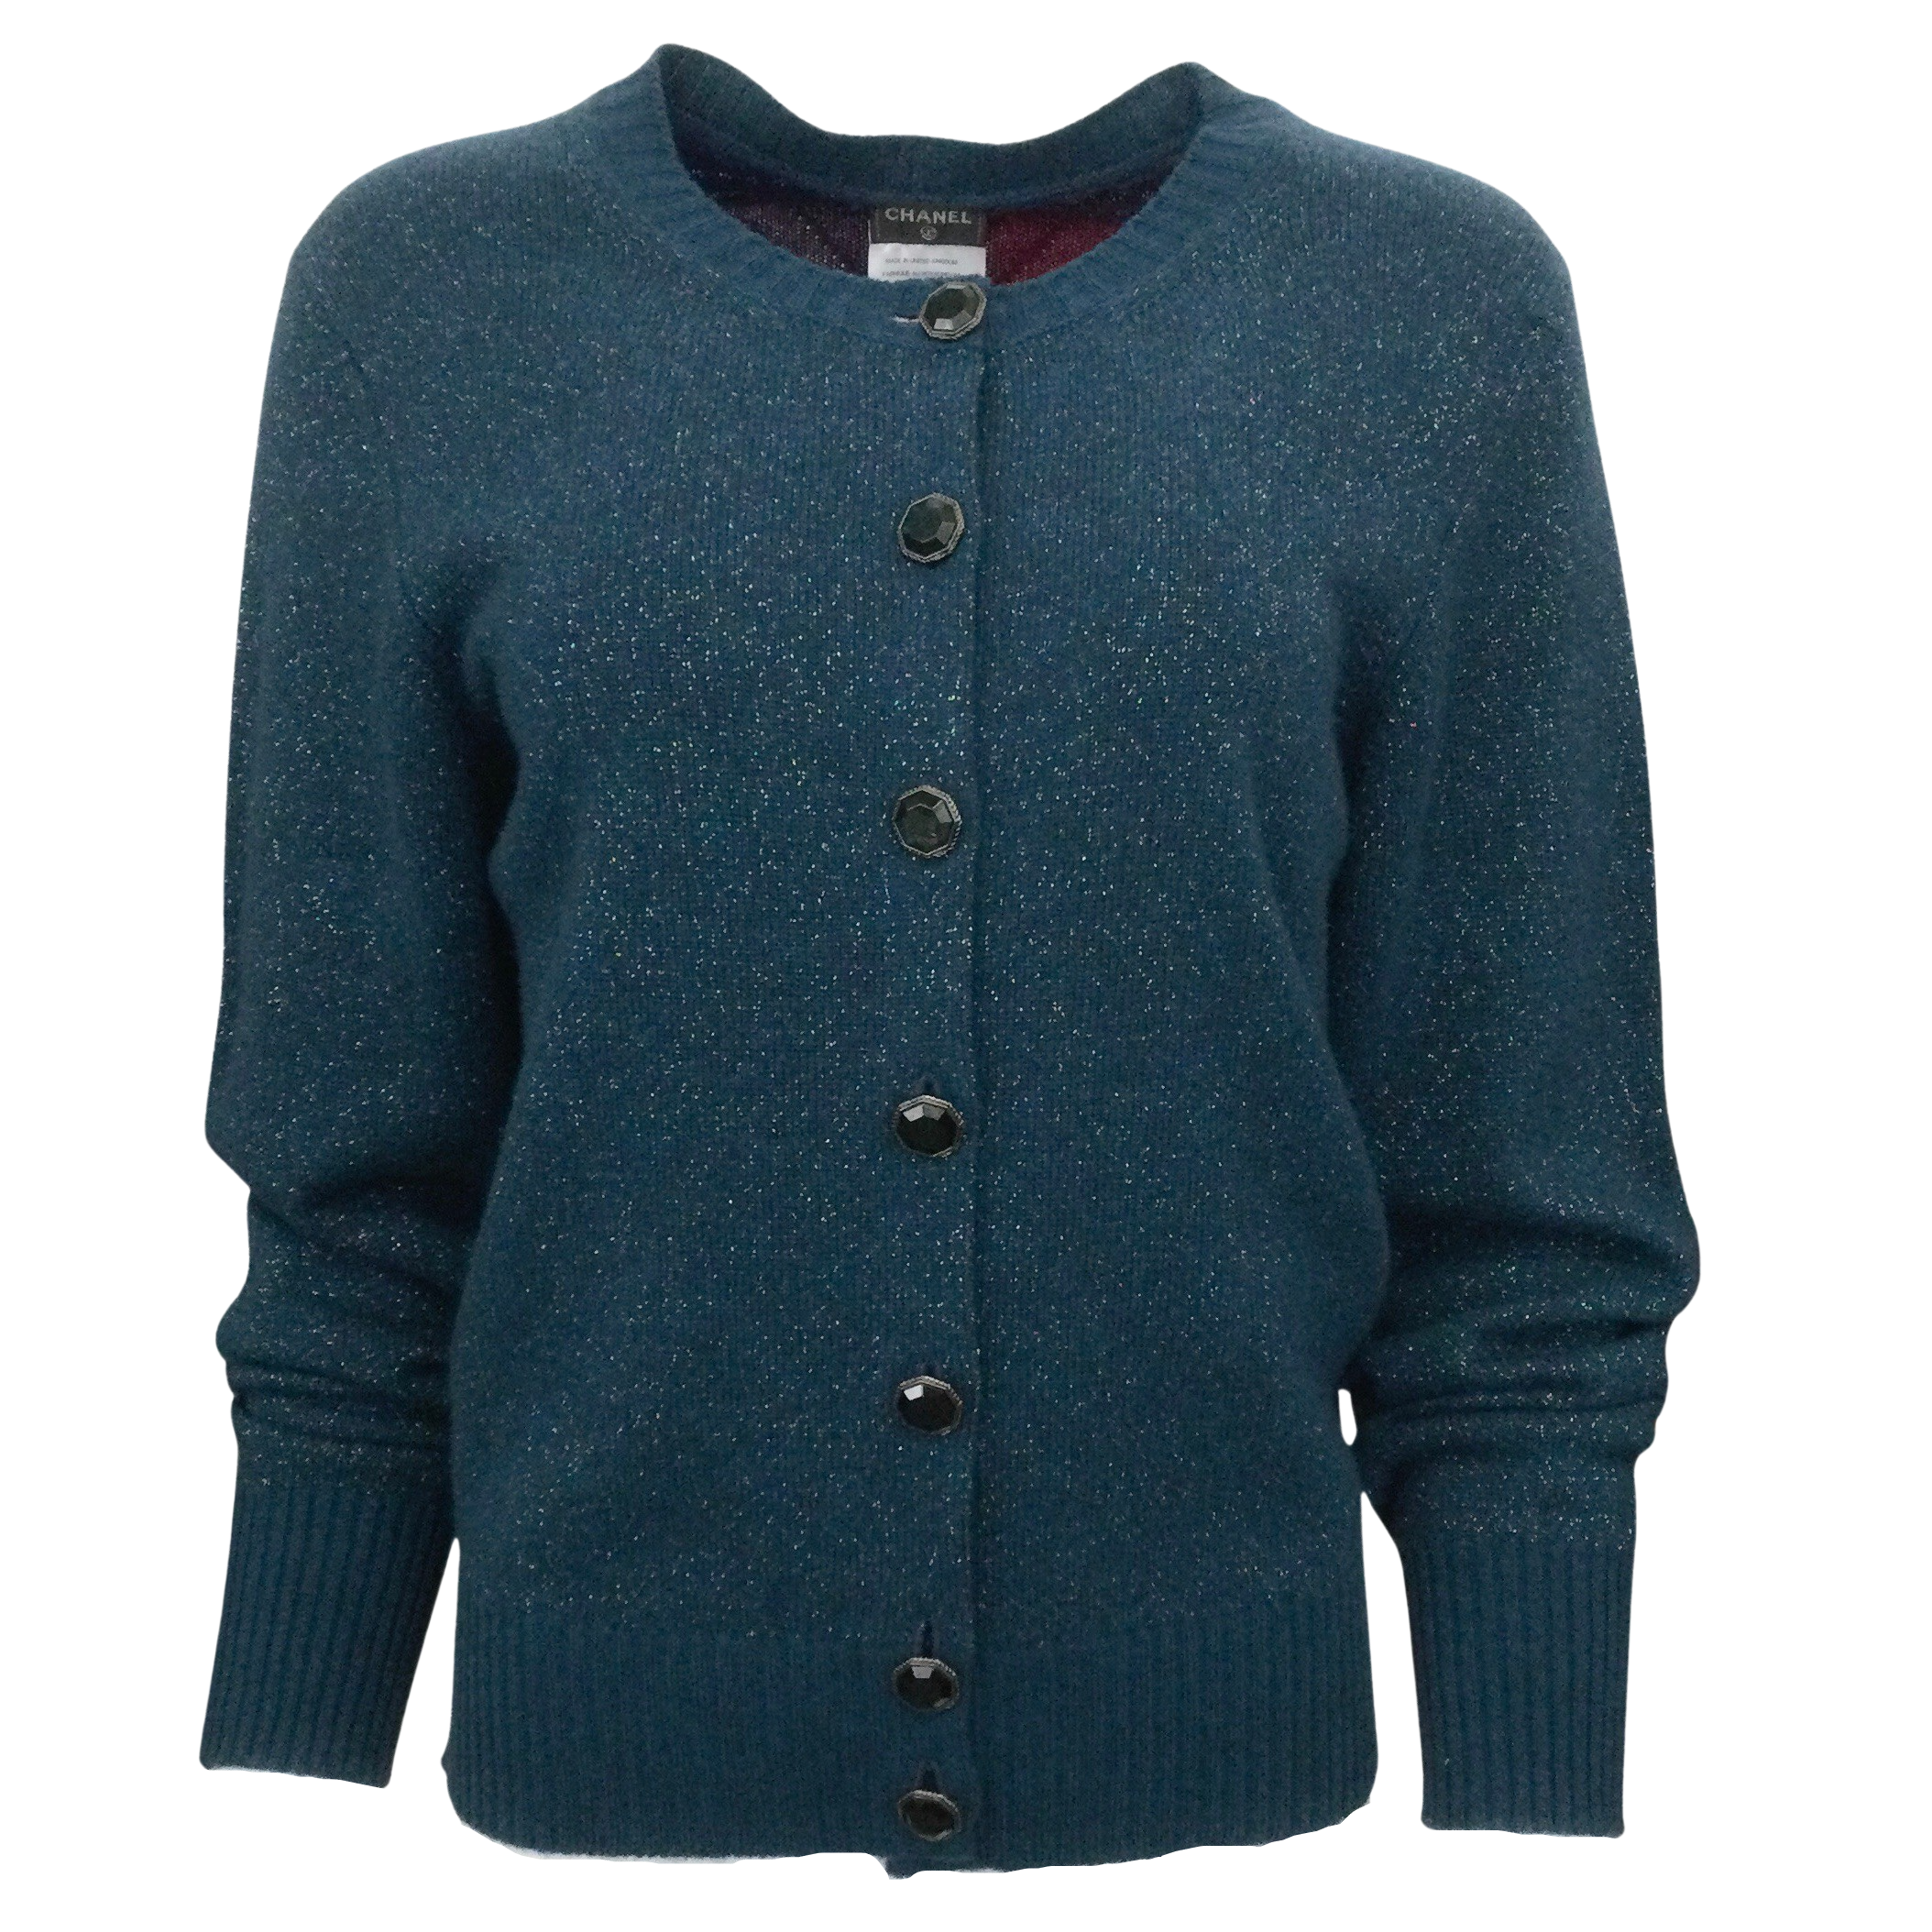 Chanel Dark Turquoise Cashmere Shimmer Cardigan